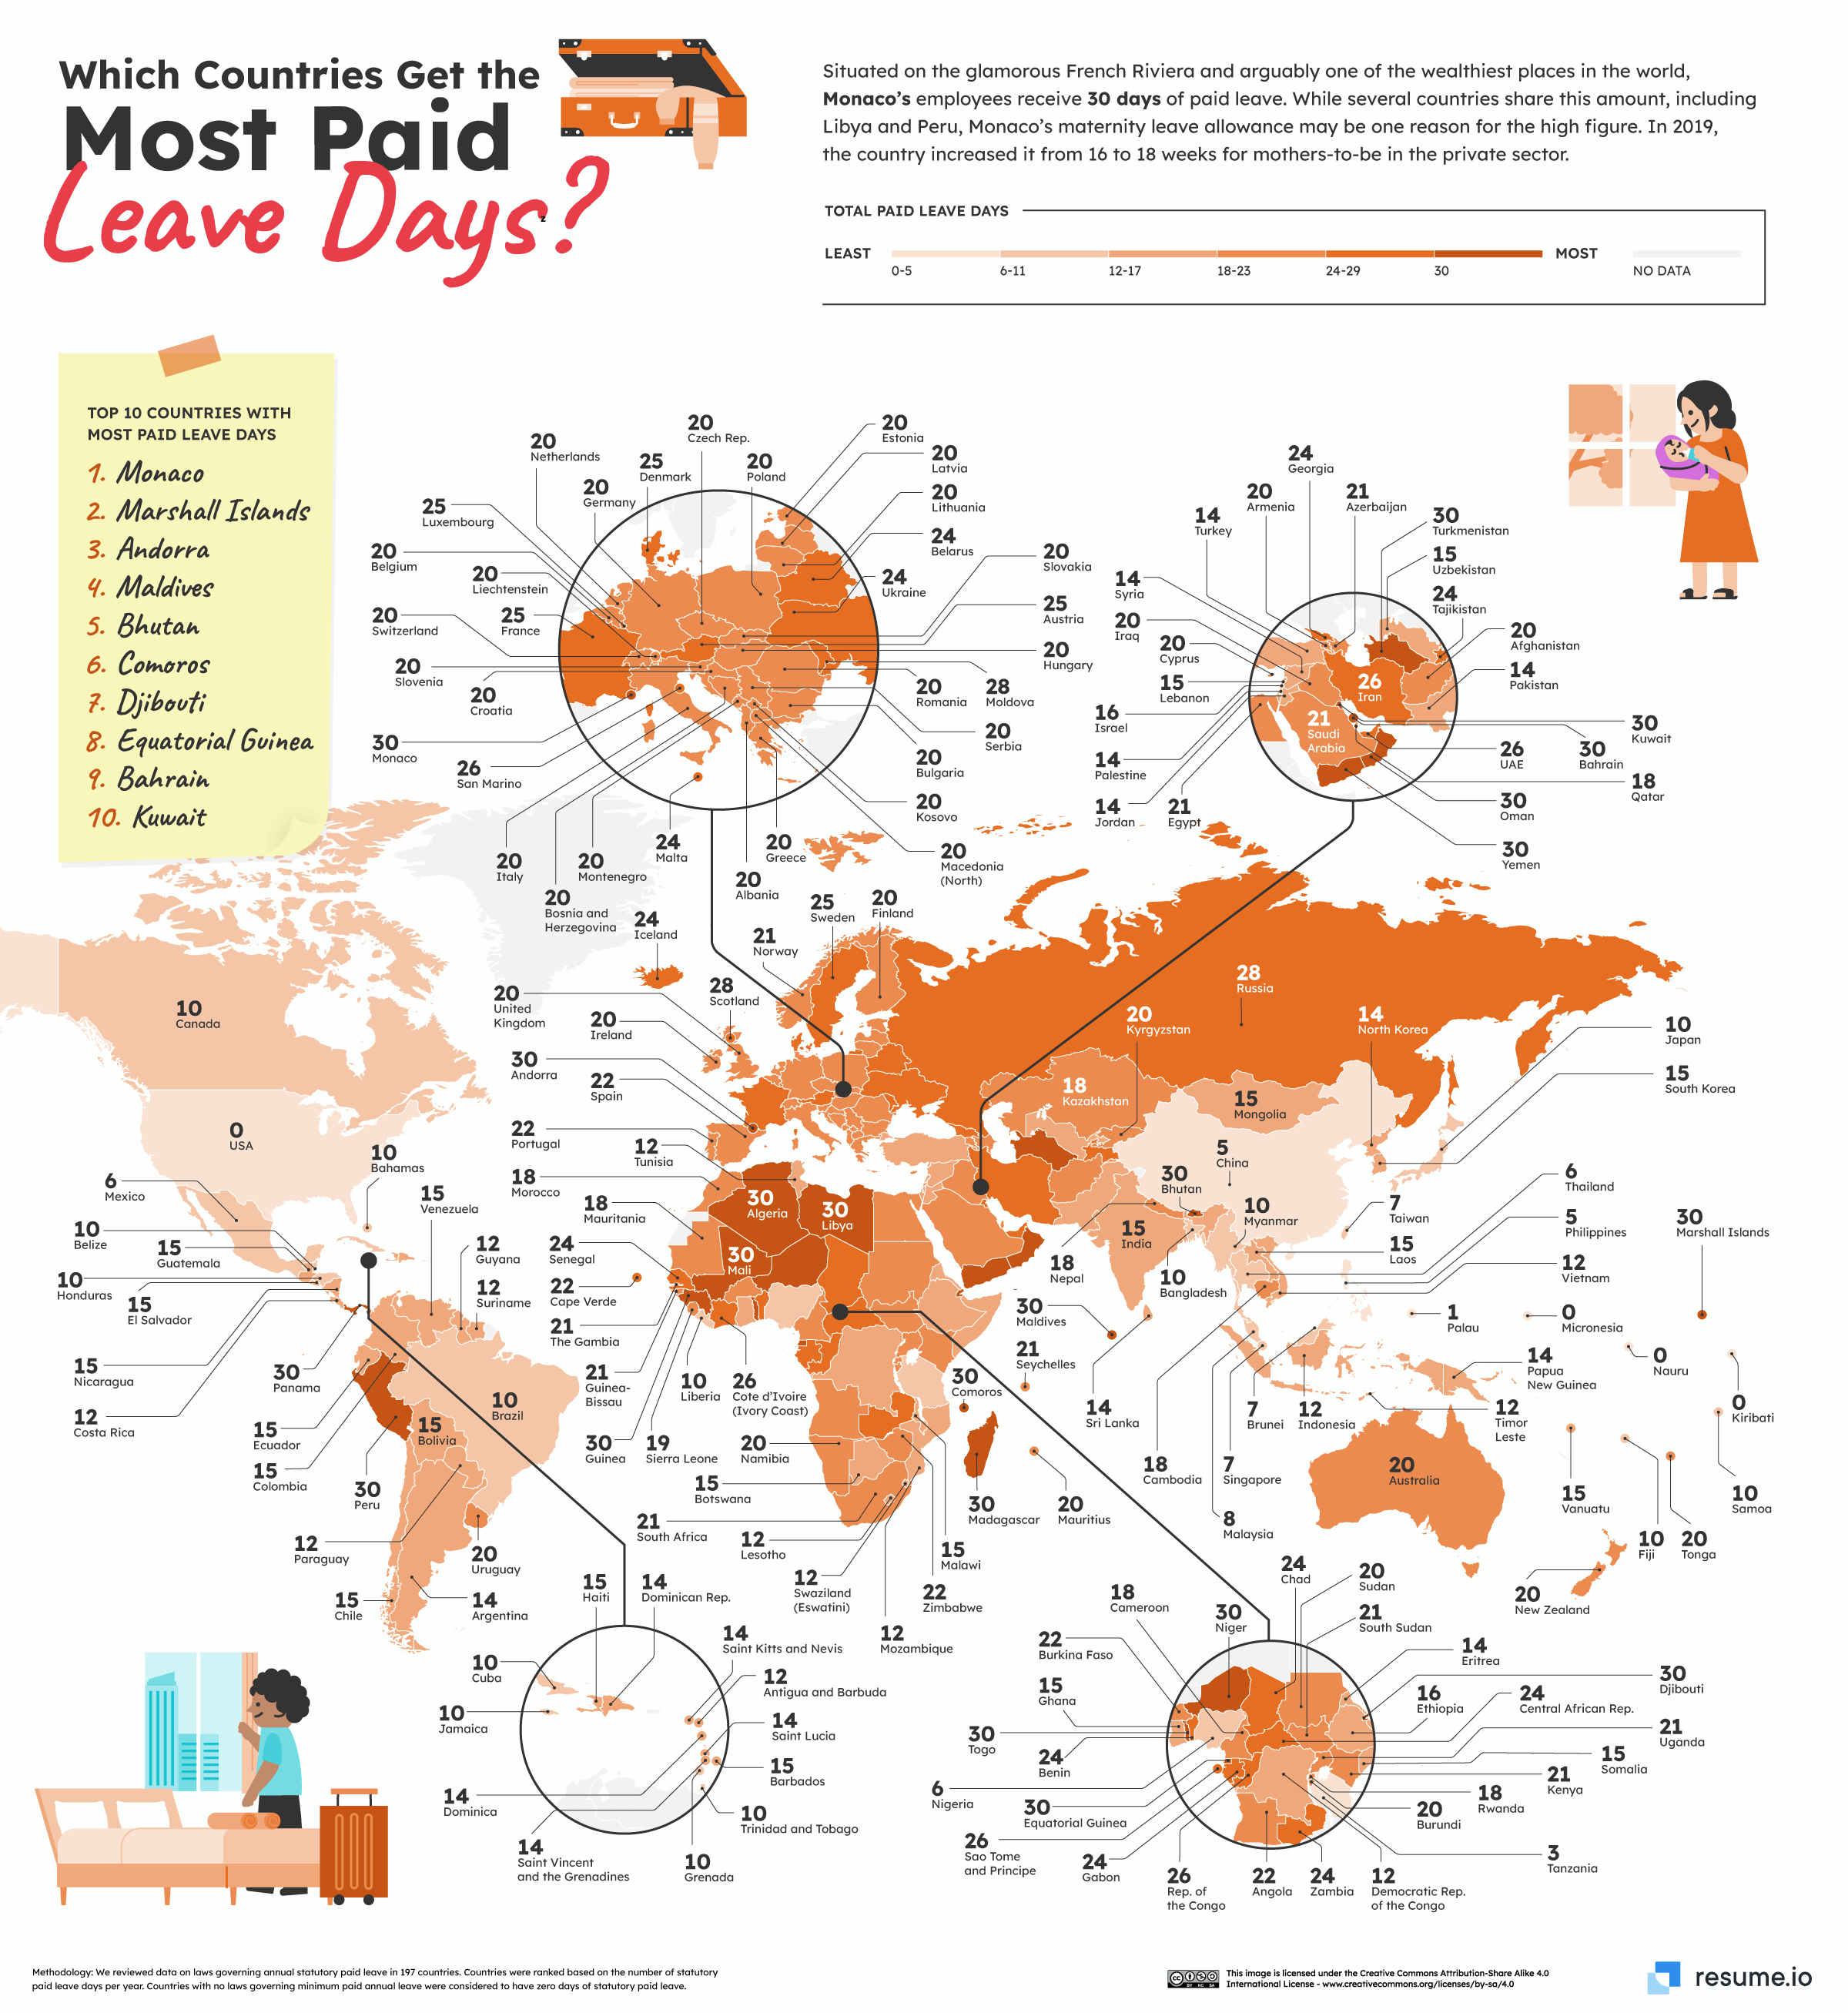 Which Countries Get the Most Paid Leave Days?